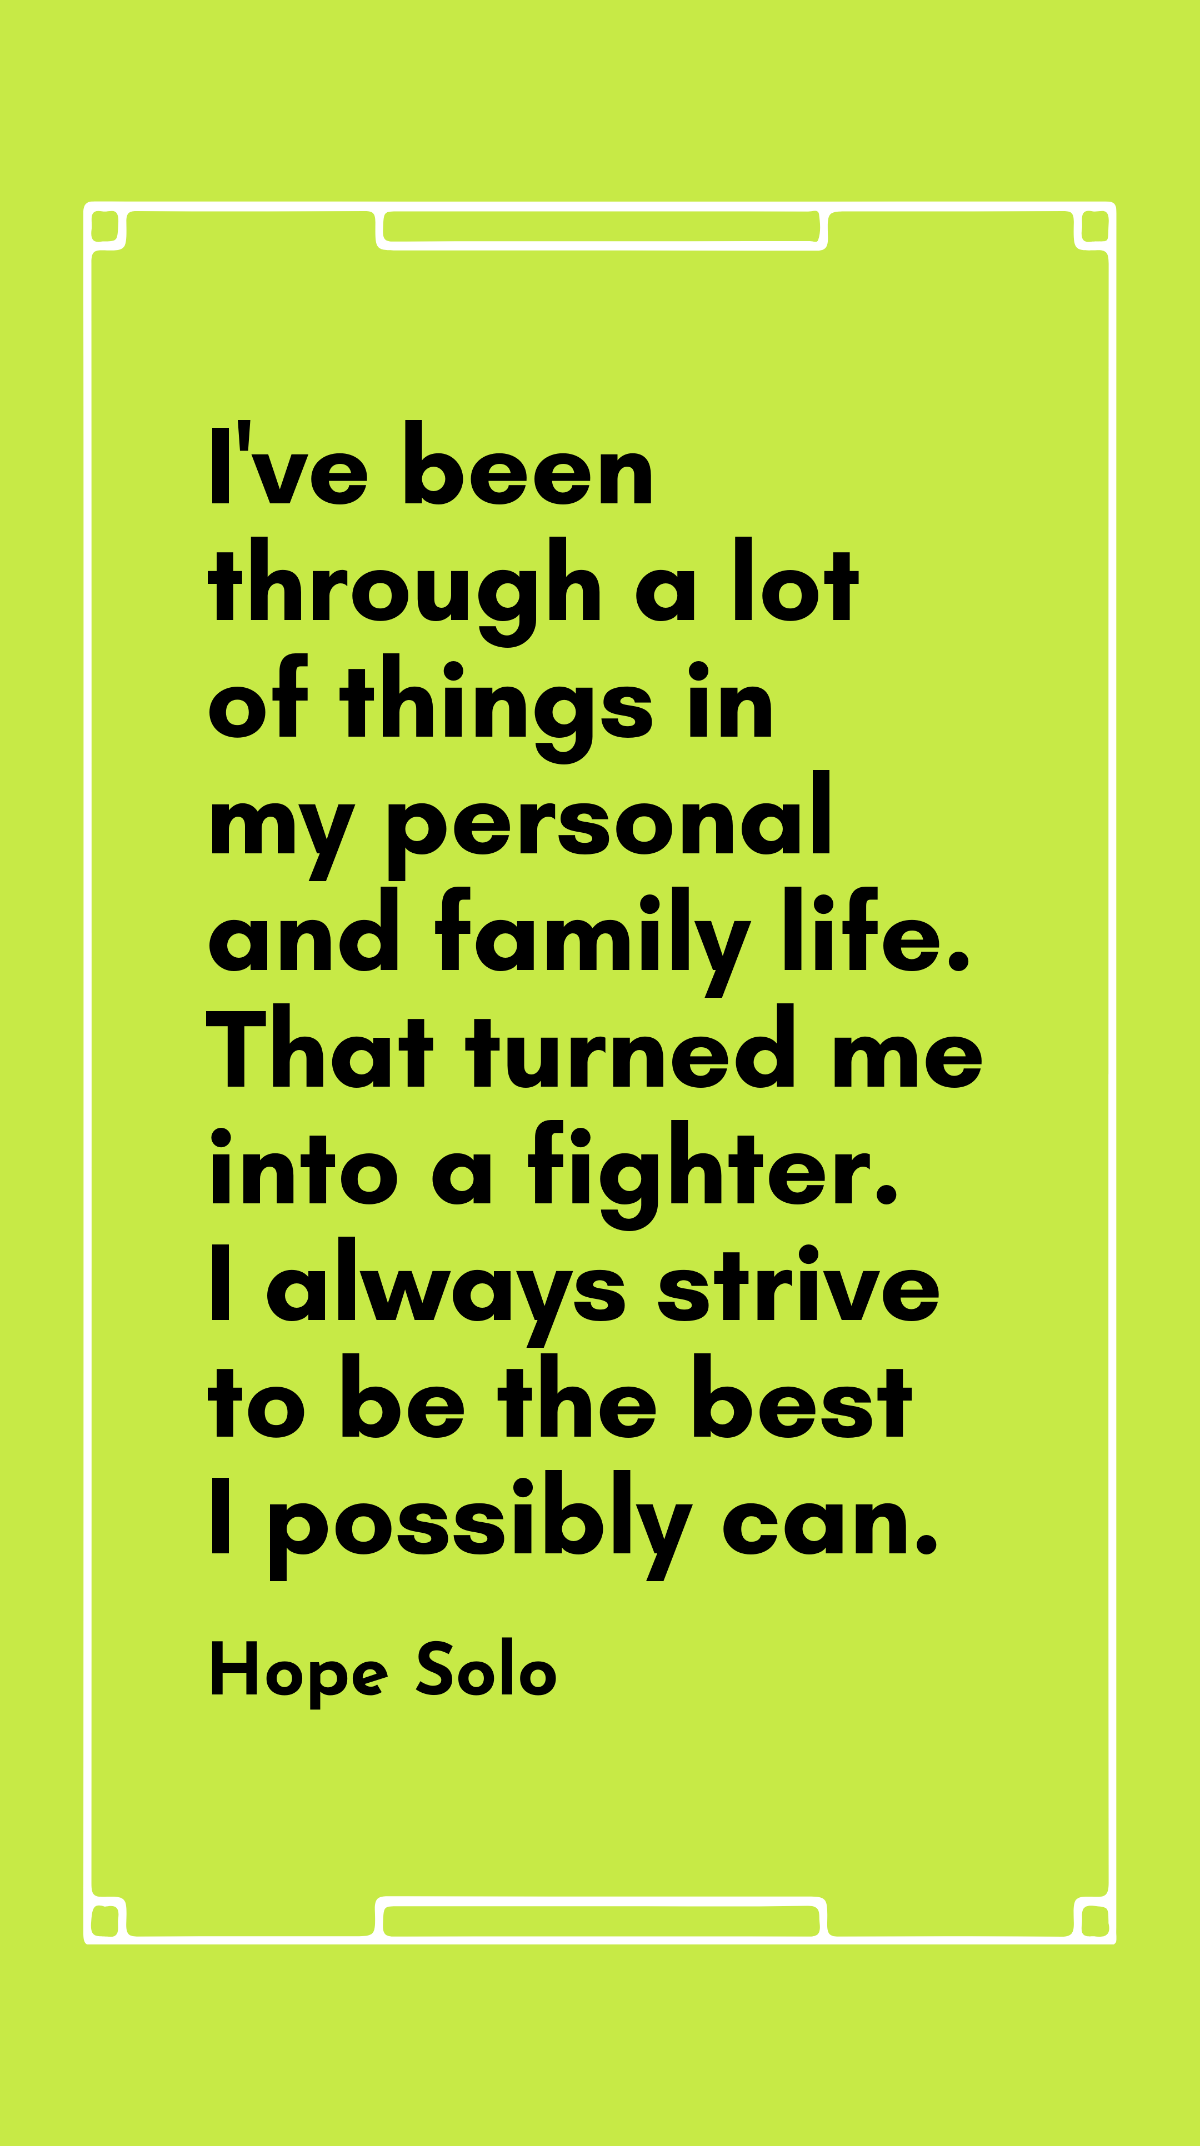 Hope Solo - I've been through a lot of things in my personal and family life. That turned me into a fighter. I always strive to be the best I possibly can. Template